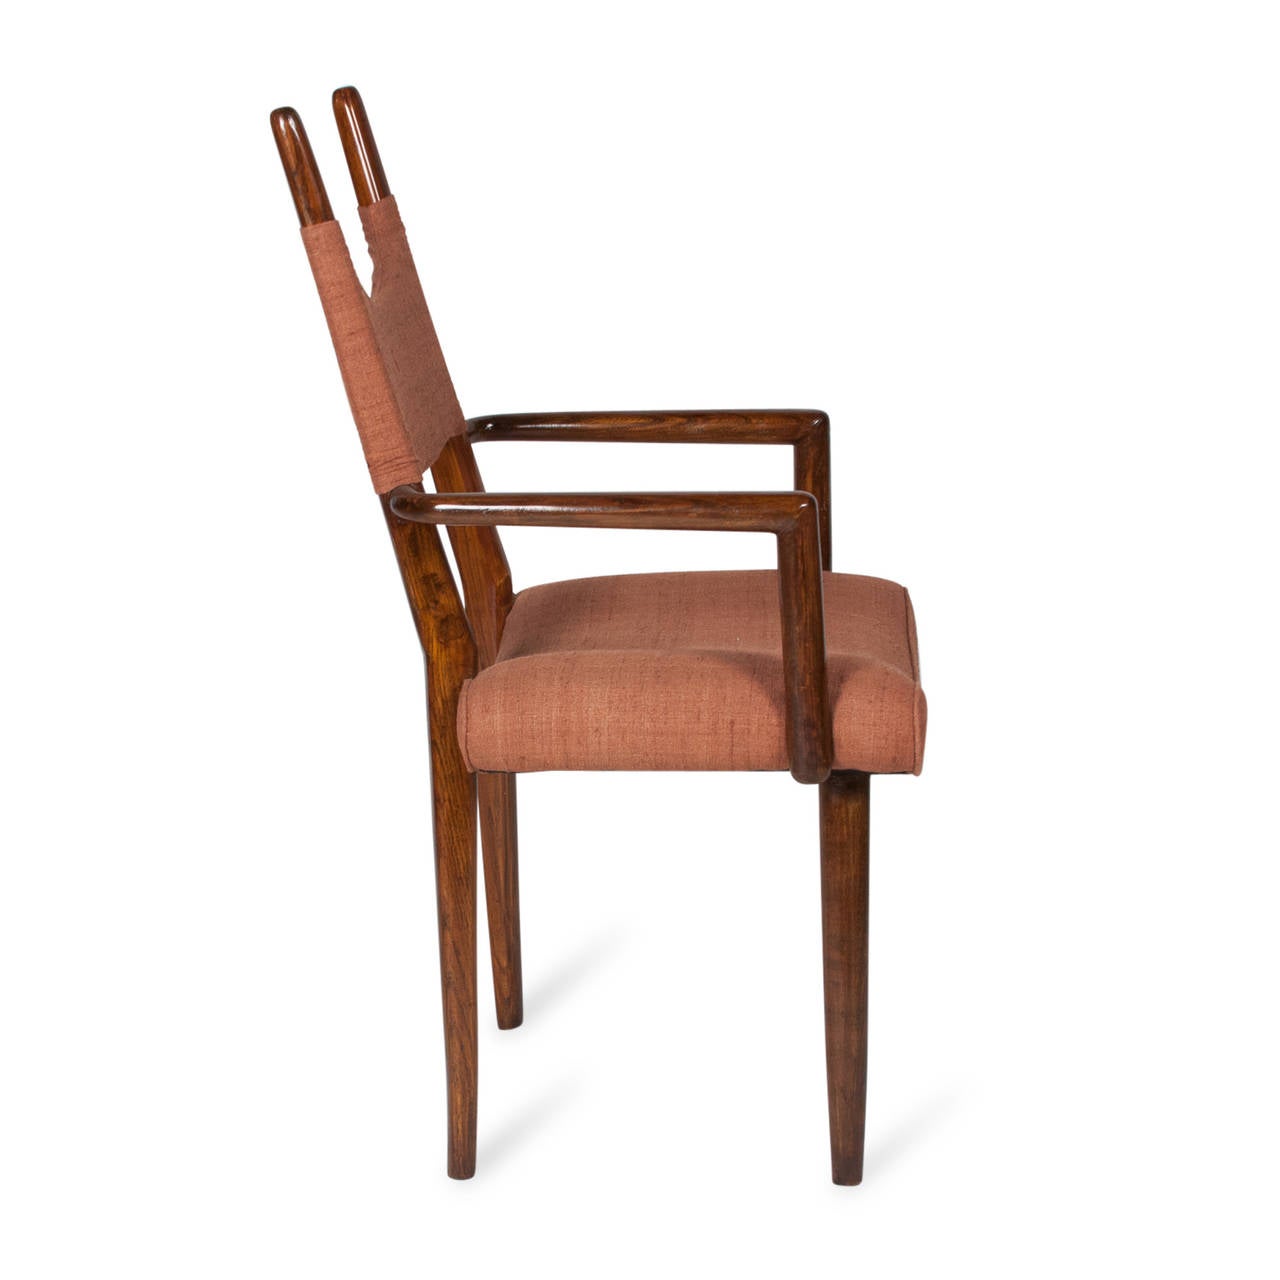 Mid-20th Century Pair of Palissandre Dining Chairs by Jean Royere, French, 1950s For Sale